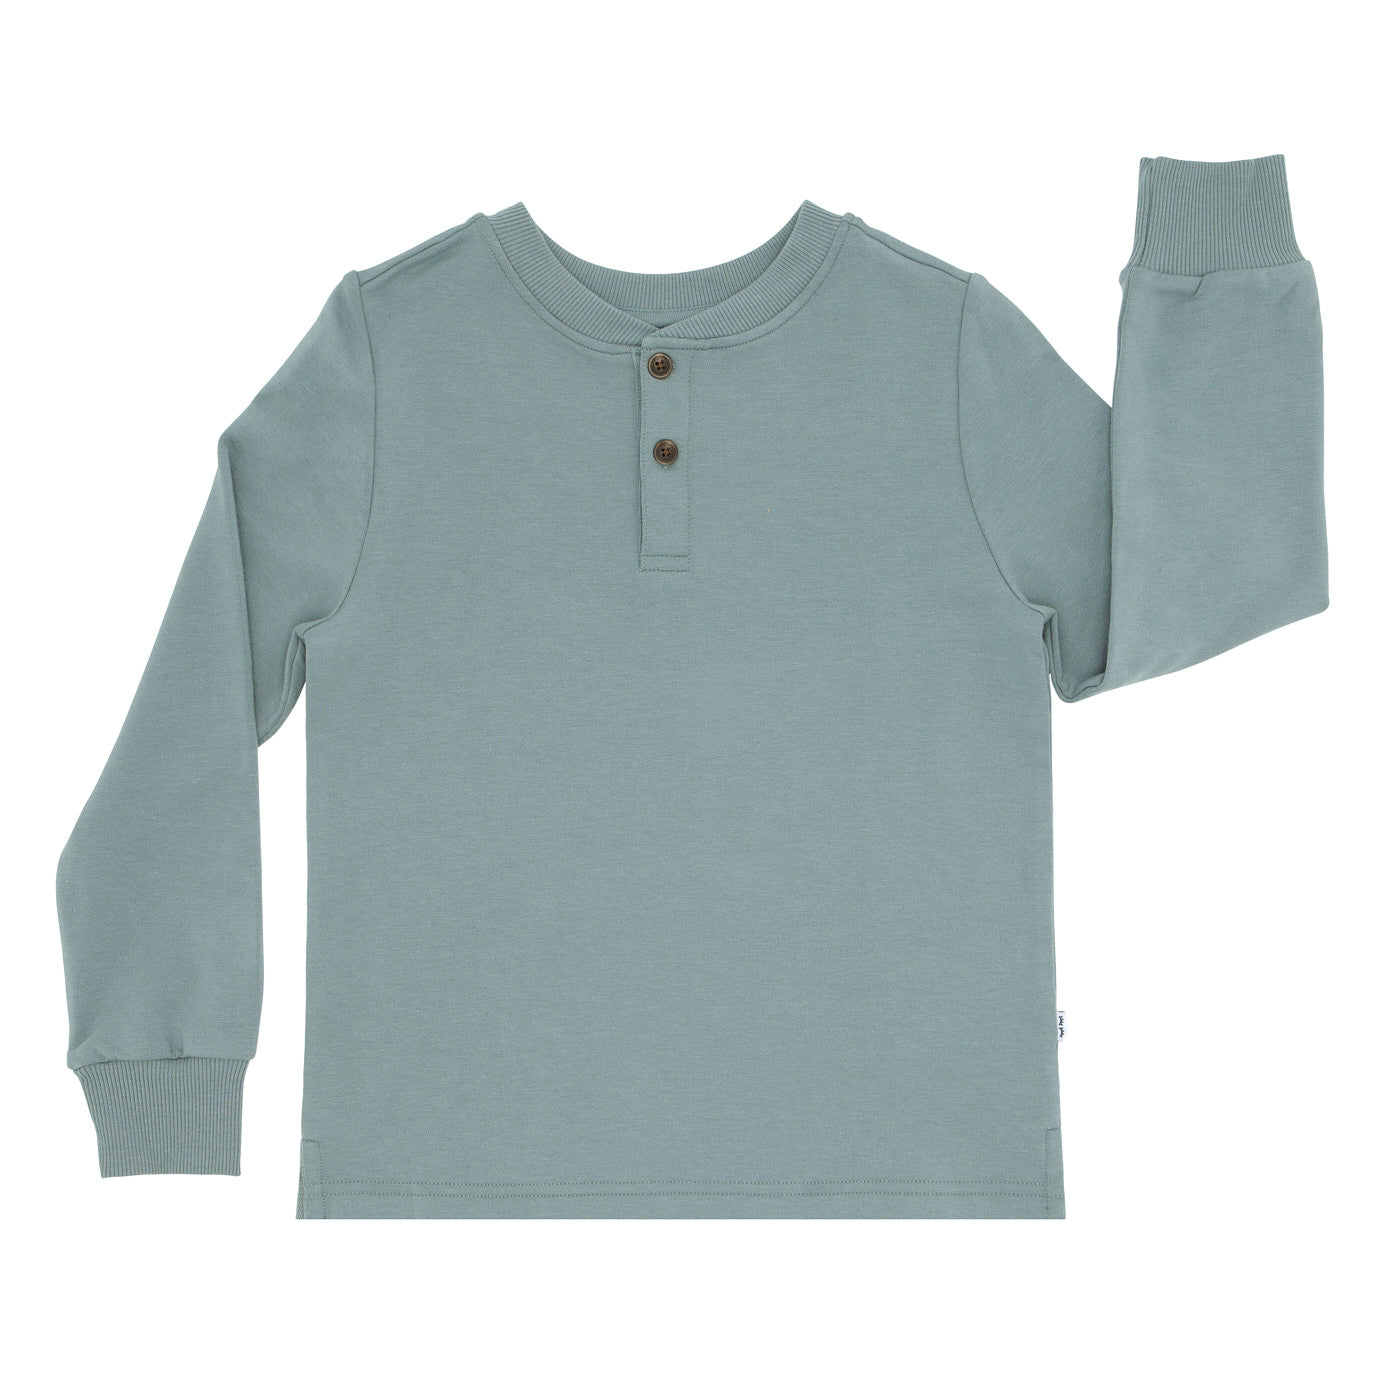 Flat lay image of a Vintage Teal henley tee